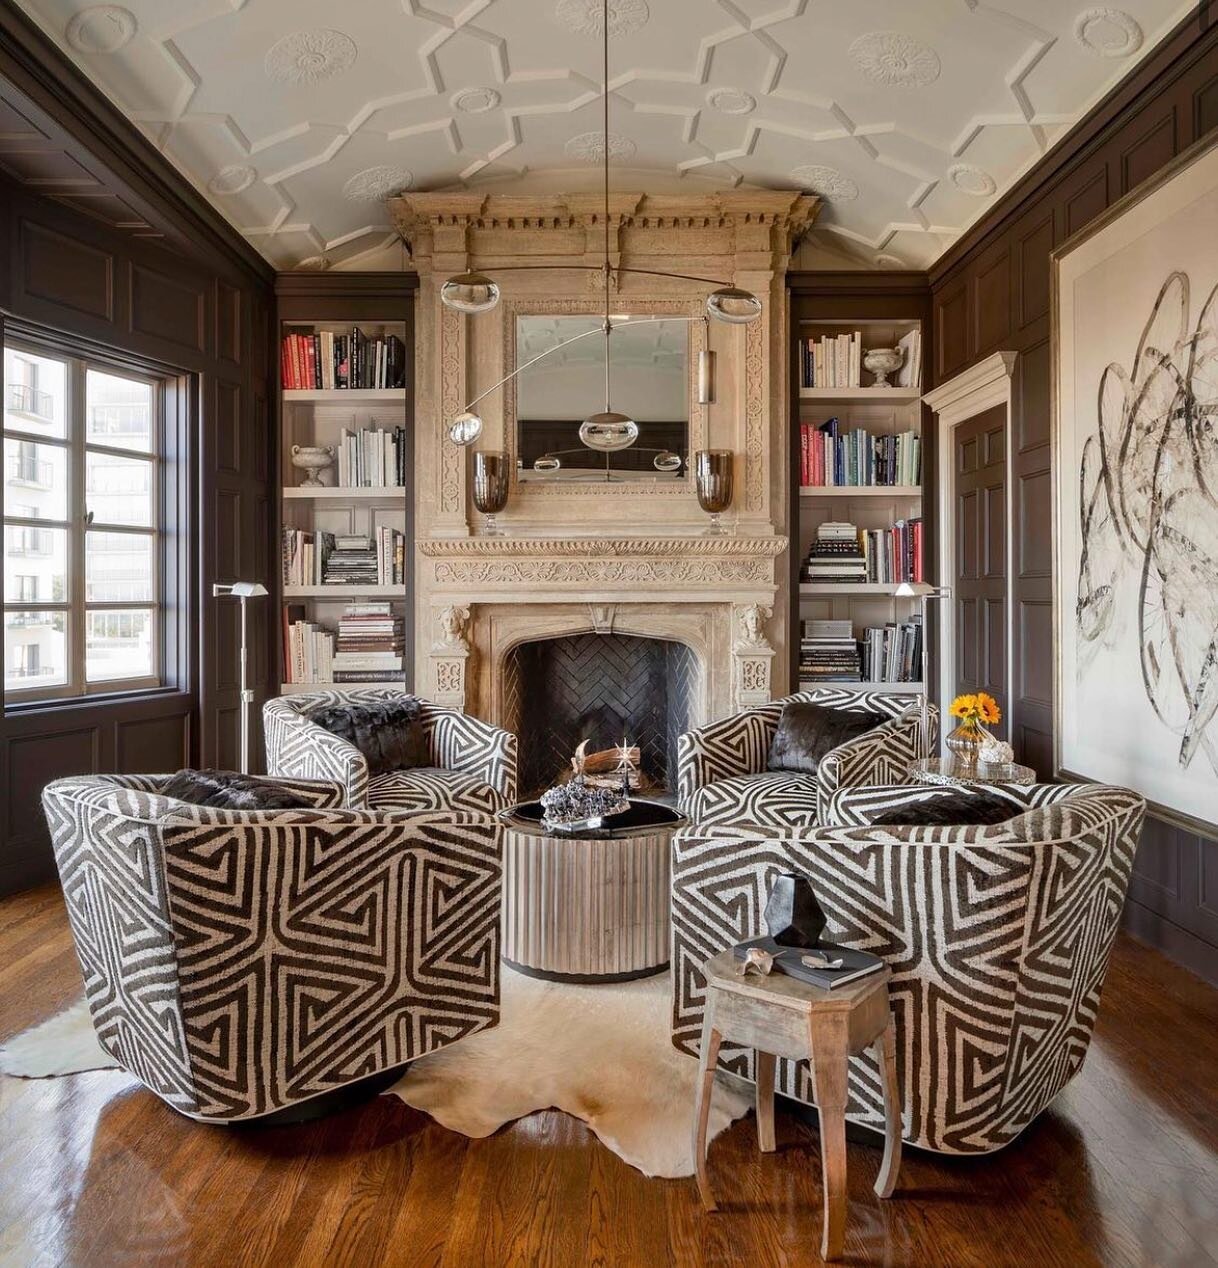 Tribal elegance makes a statement in this beautiful library designed by @candacebarnesdesign for her home in San Francisco&rsquo;s historic Chambord penthouse. Thank you @1stdibs for sharing this special project! 
Photography by @pargast 
As featured